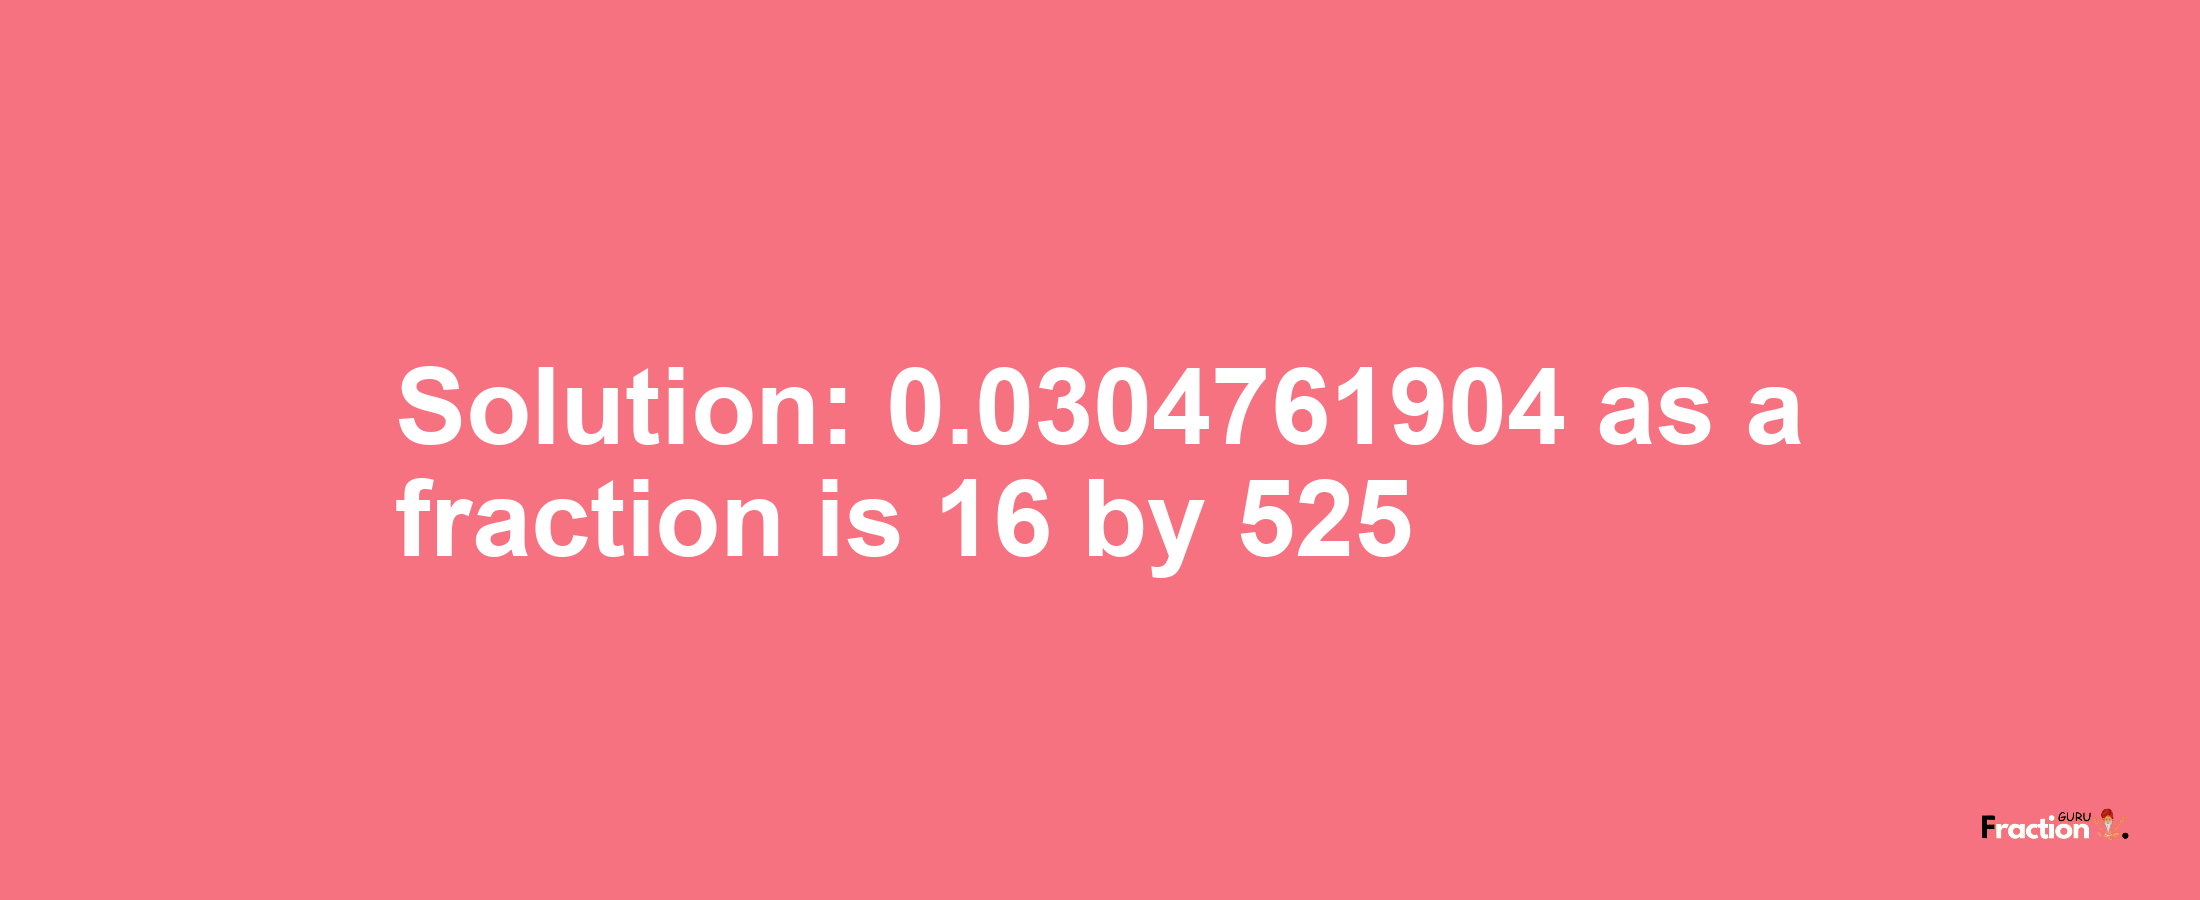 Solution:0.0304761904 as a fraction is 16/525